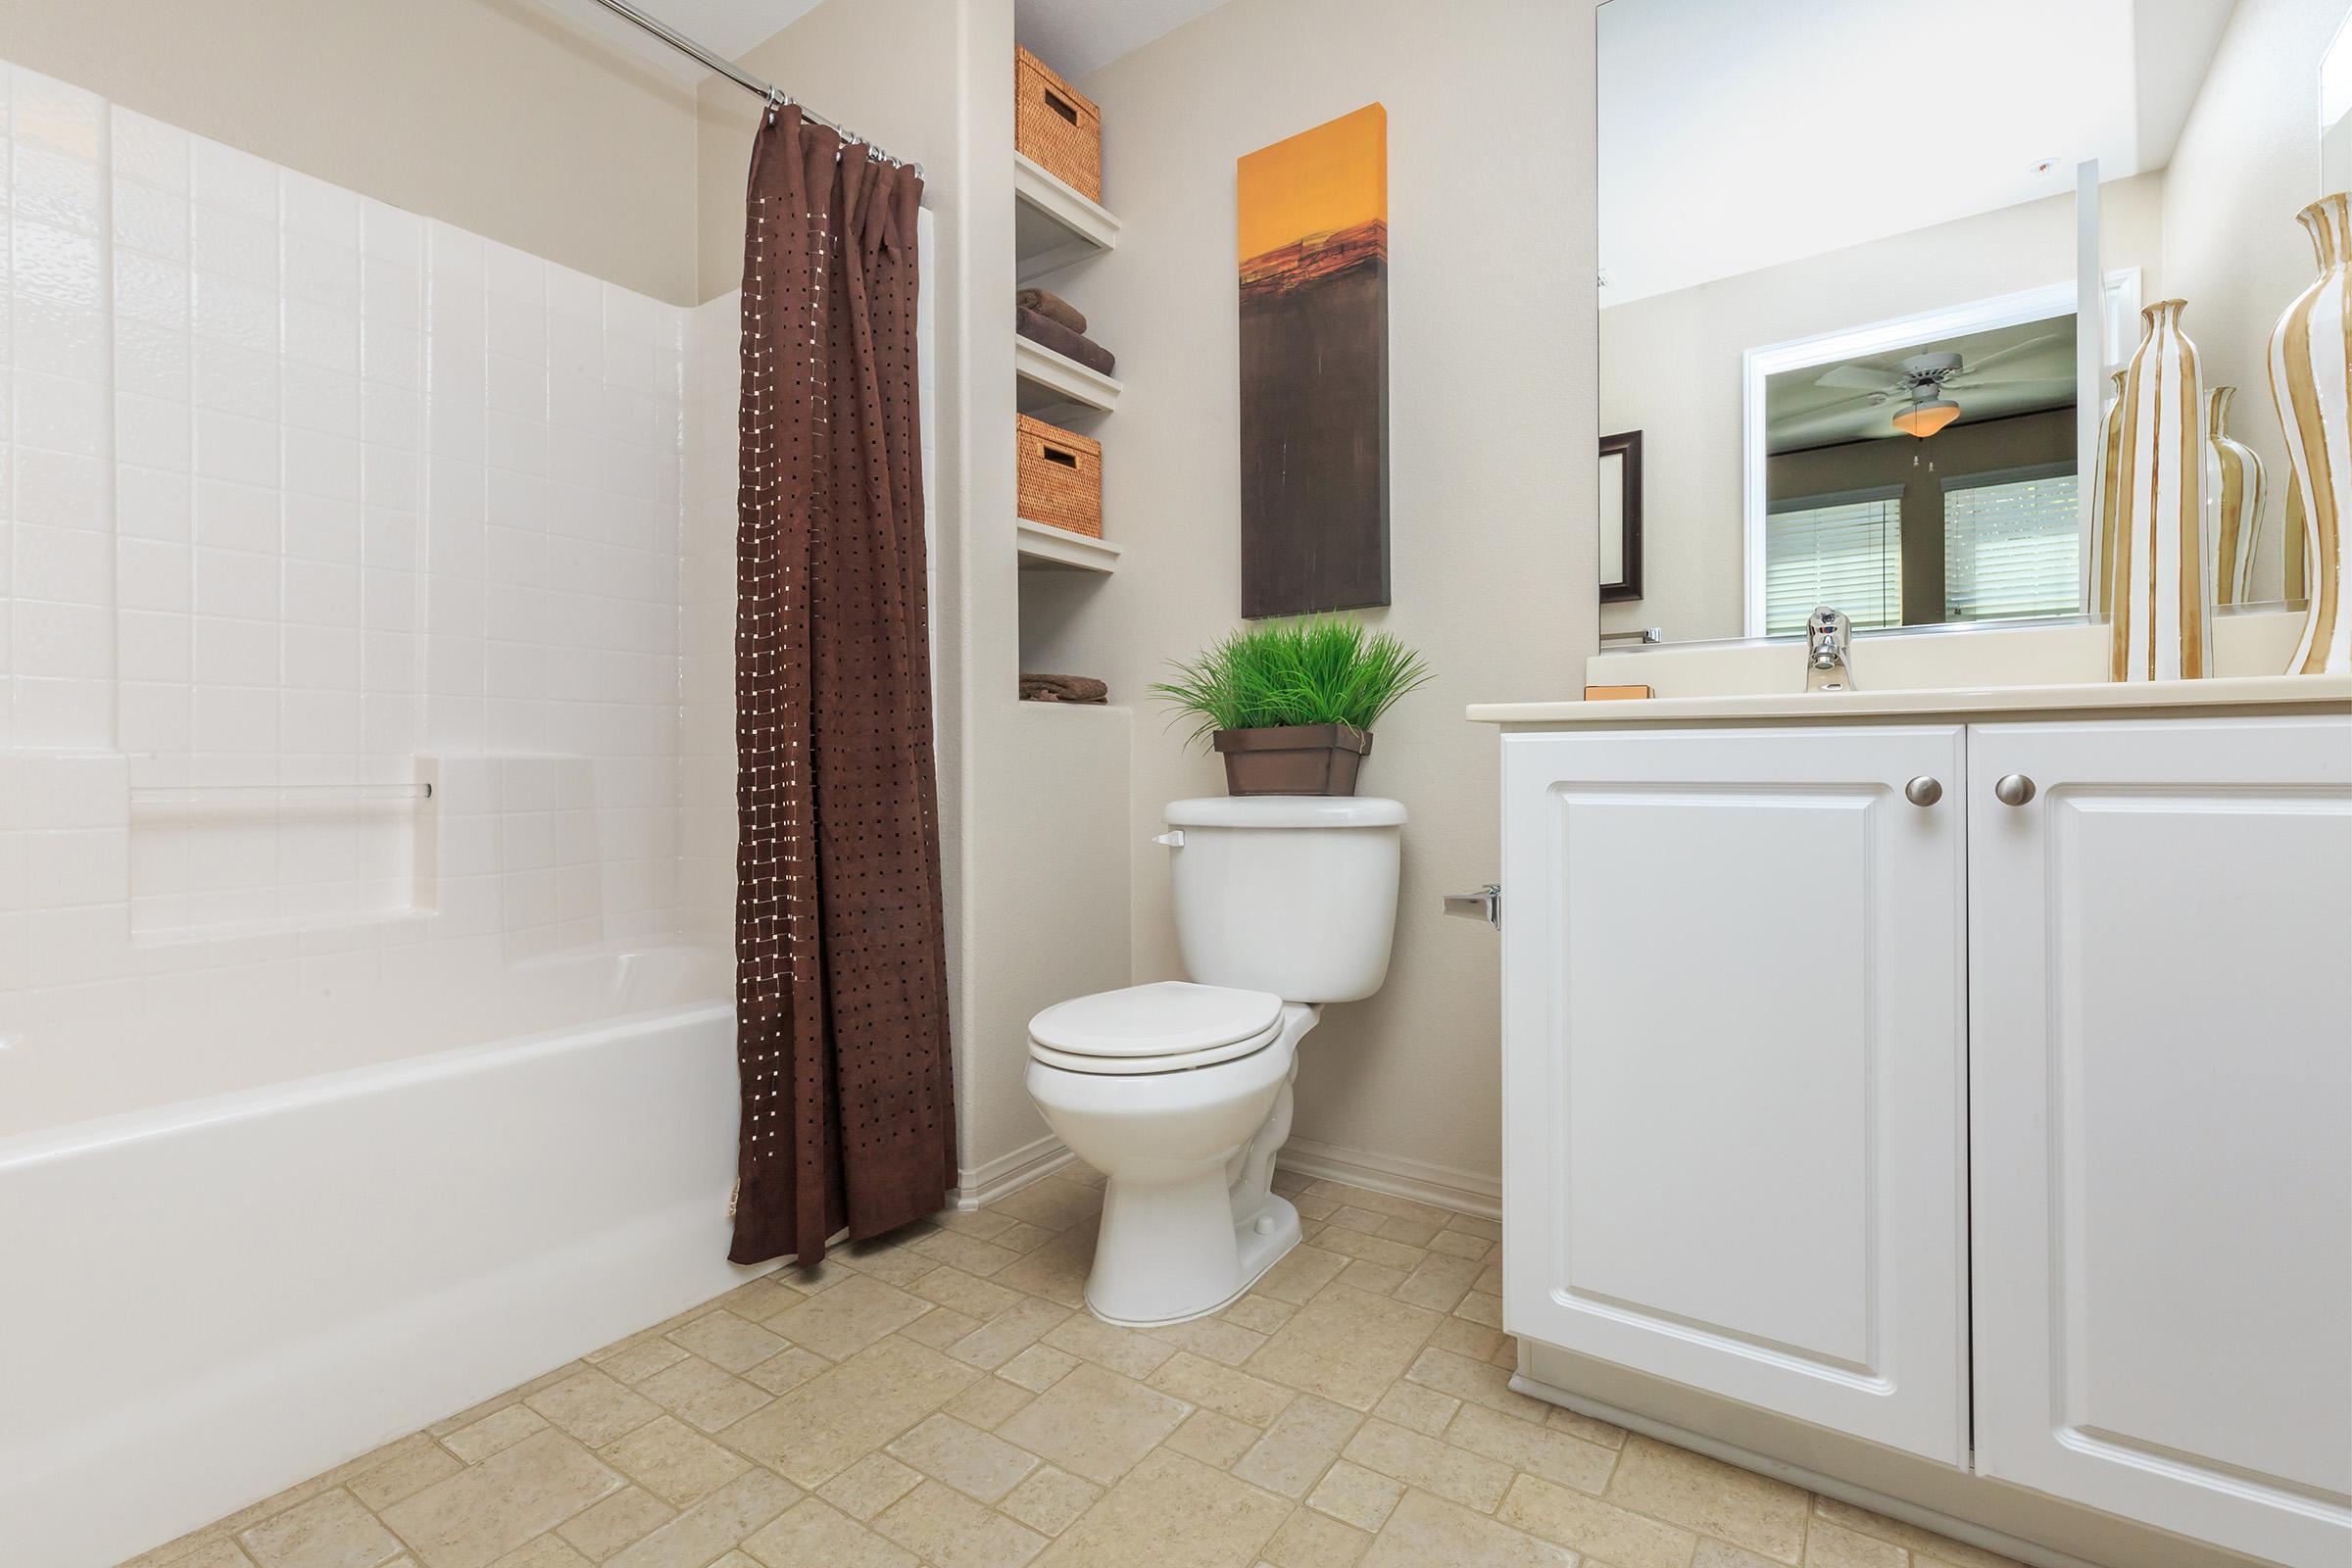 Bathroom with brown shower curtain